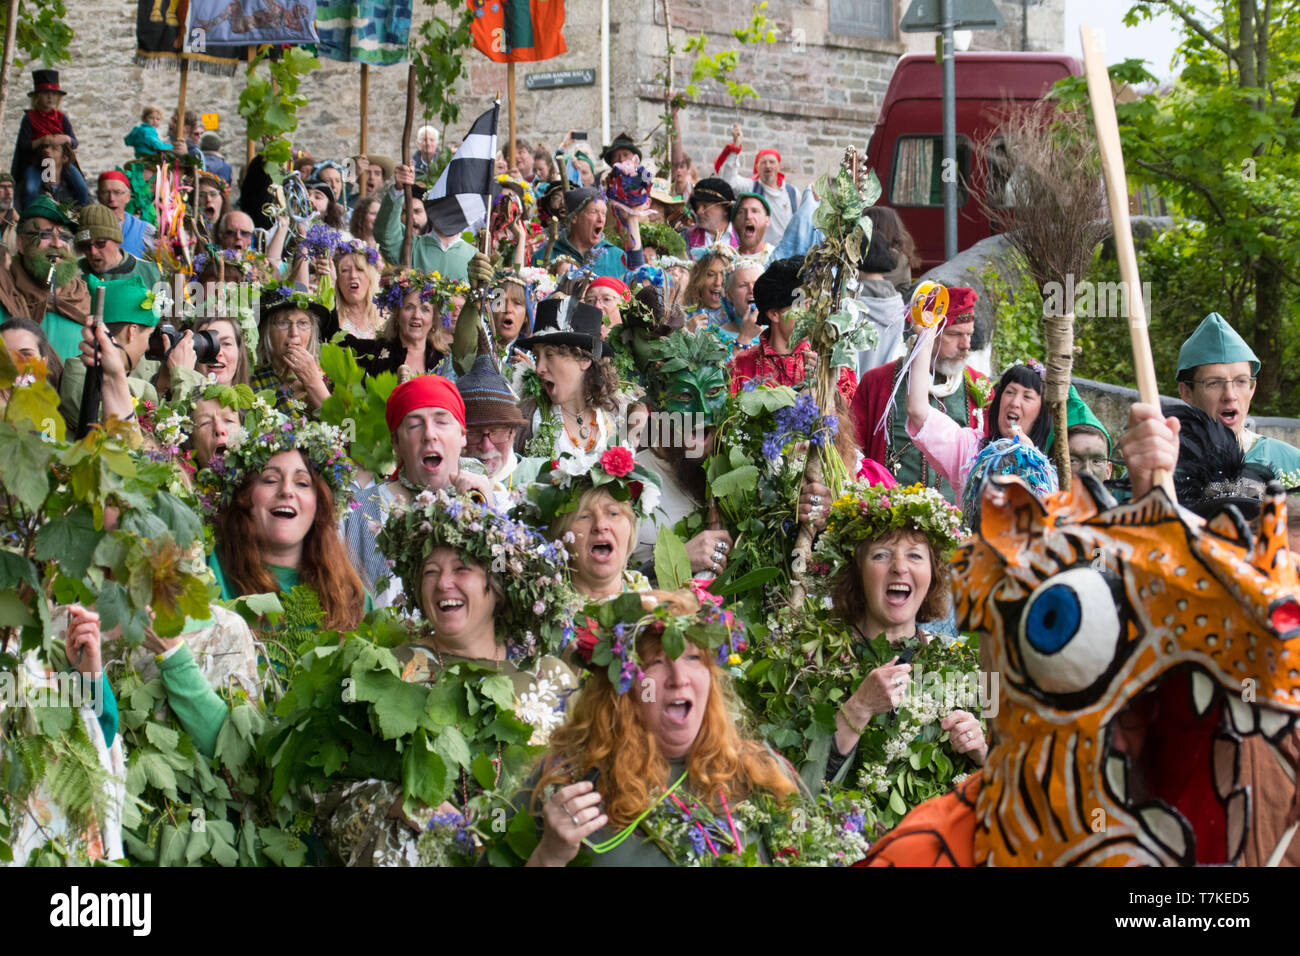 Helston, Cornwall, UK. 8th May 2019. Helston Flora day annual spring festival. Seen here the participants of the 'Hal-An-Tow'. From Robin Hood and Little John, St George & the Dragon, St Michael & the Devil to the Spaniards of Mousehole, all reinact the battles of `good defeating evil`to `drive out the old and welcome in the new`. Credit Simon Maycock / Alamy Live News. Stock Photo